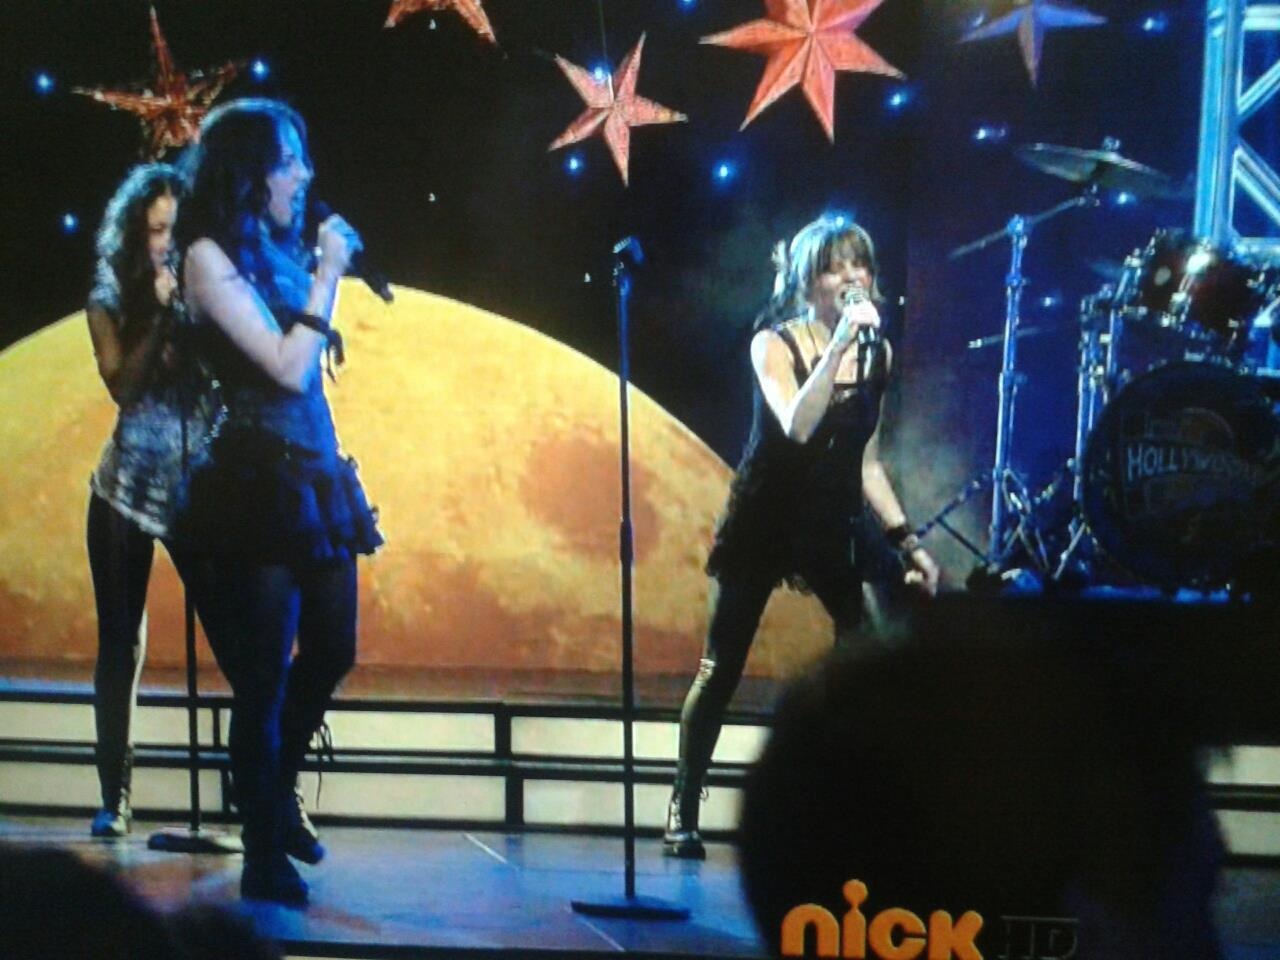 VICTORiOUS on Nickelodeon